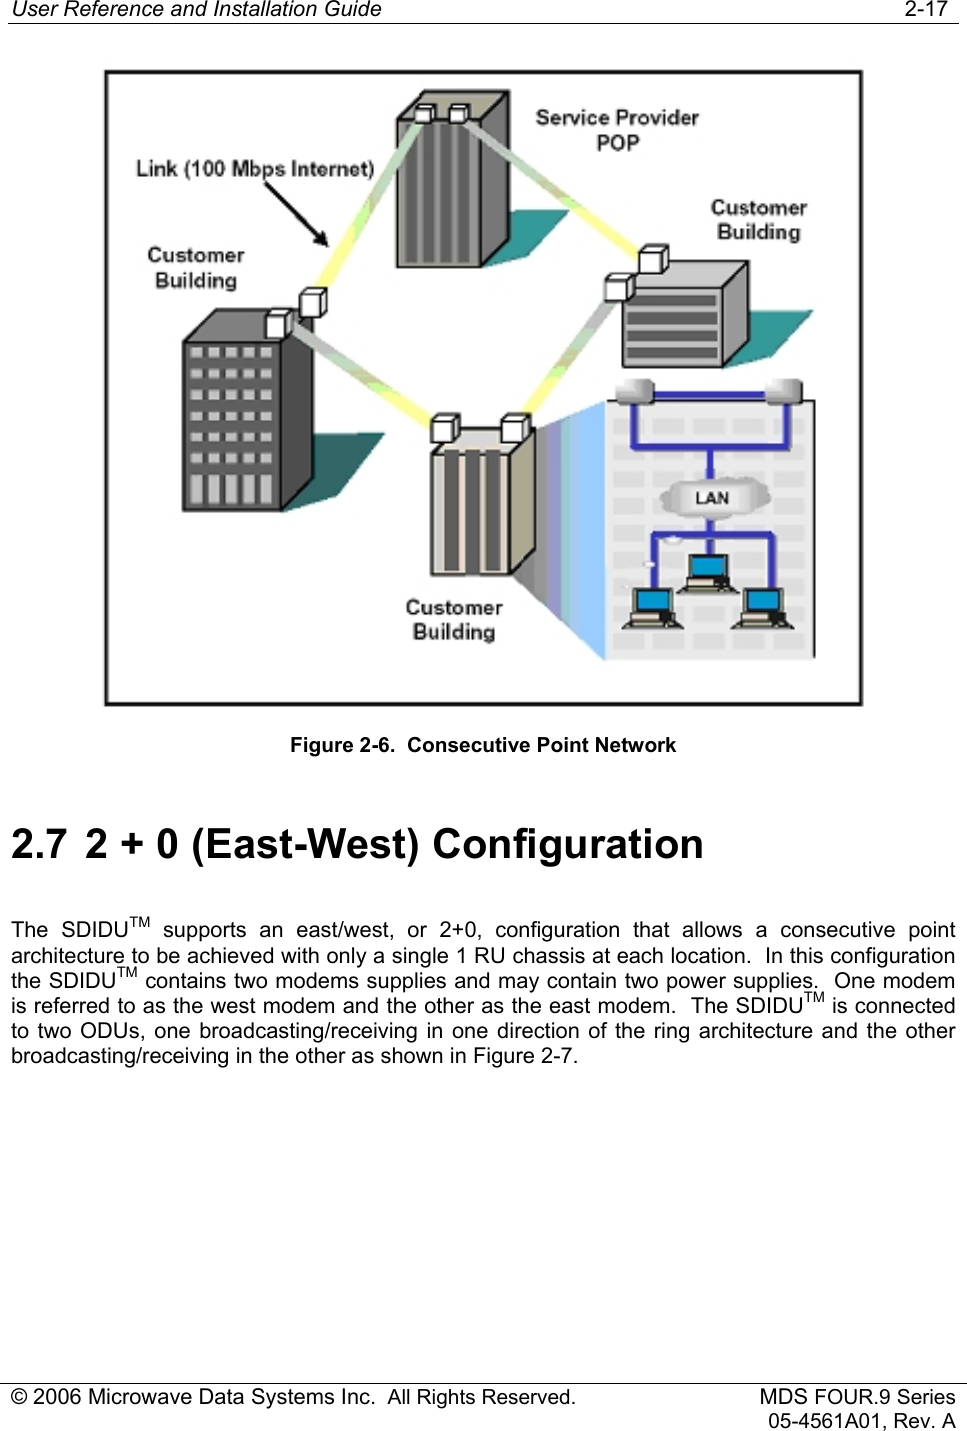 User Reference and Installation Guide   2-17 © 2006 Microwave Data Systems Inc.  All Rights Reserved. MDS FOUR.9 Series 05-4561A01, Rev. A  Figure 2-6.  Consecutive Point Network 2.7  2 + 0 (East-West) Configuration  The SDIDUTM supports an east/west, or 2+0, configuration that allows a consecutive point architecture to be achieved with only a single 1 RU chassis at each location.  In this configuration the SDIDUTM contains two modems supplies and may contain two power supplies.  One modem is referred to as the west modem and the other as the east modem.  The SDIDUTM is connected to two ODUs, one broadcasting/receiving in one direction of the ring architecture and the other broadcasting/receiving in the other as shown in Figure 2-7. 